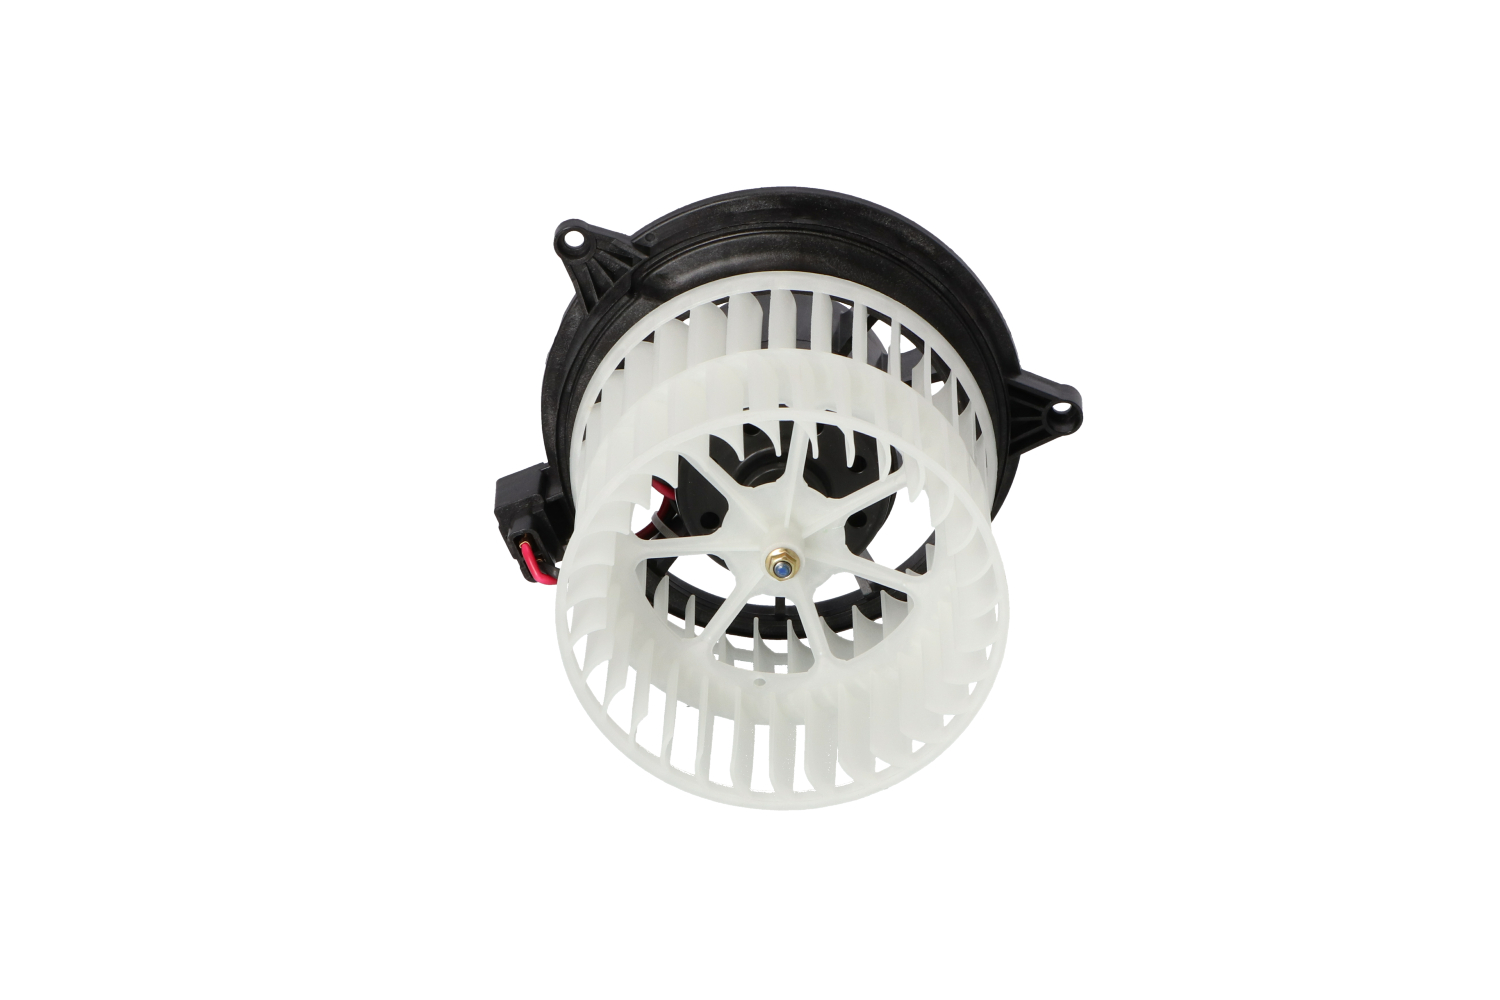 Image of NRF Ventola Abitacolo FORD 34261 1206930,1252926,2S6H18456AC Ventola Riscaldamento,Ventilatore Abitacolo,Ventola abitacolo 2S6H18456AD